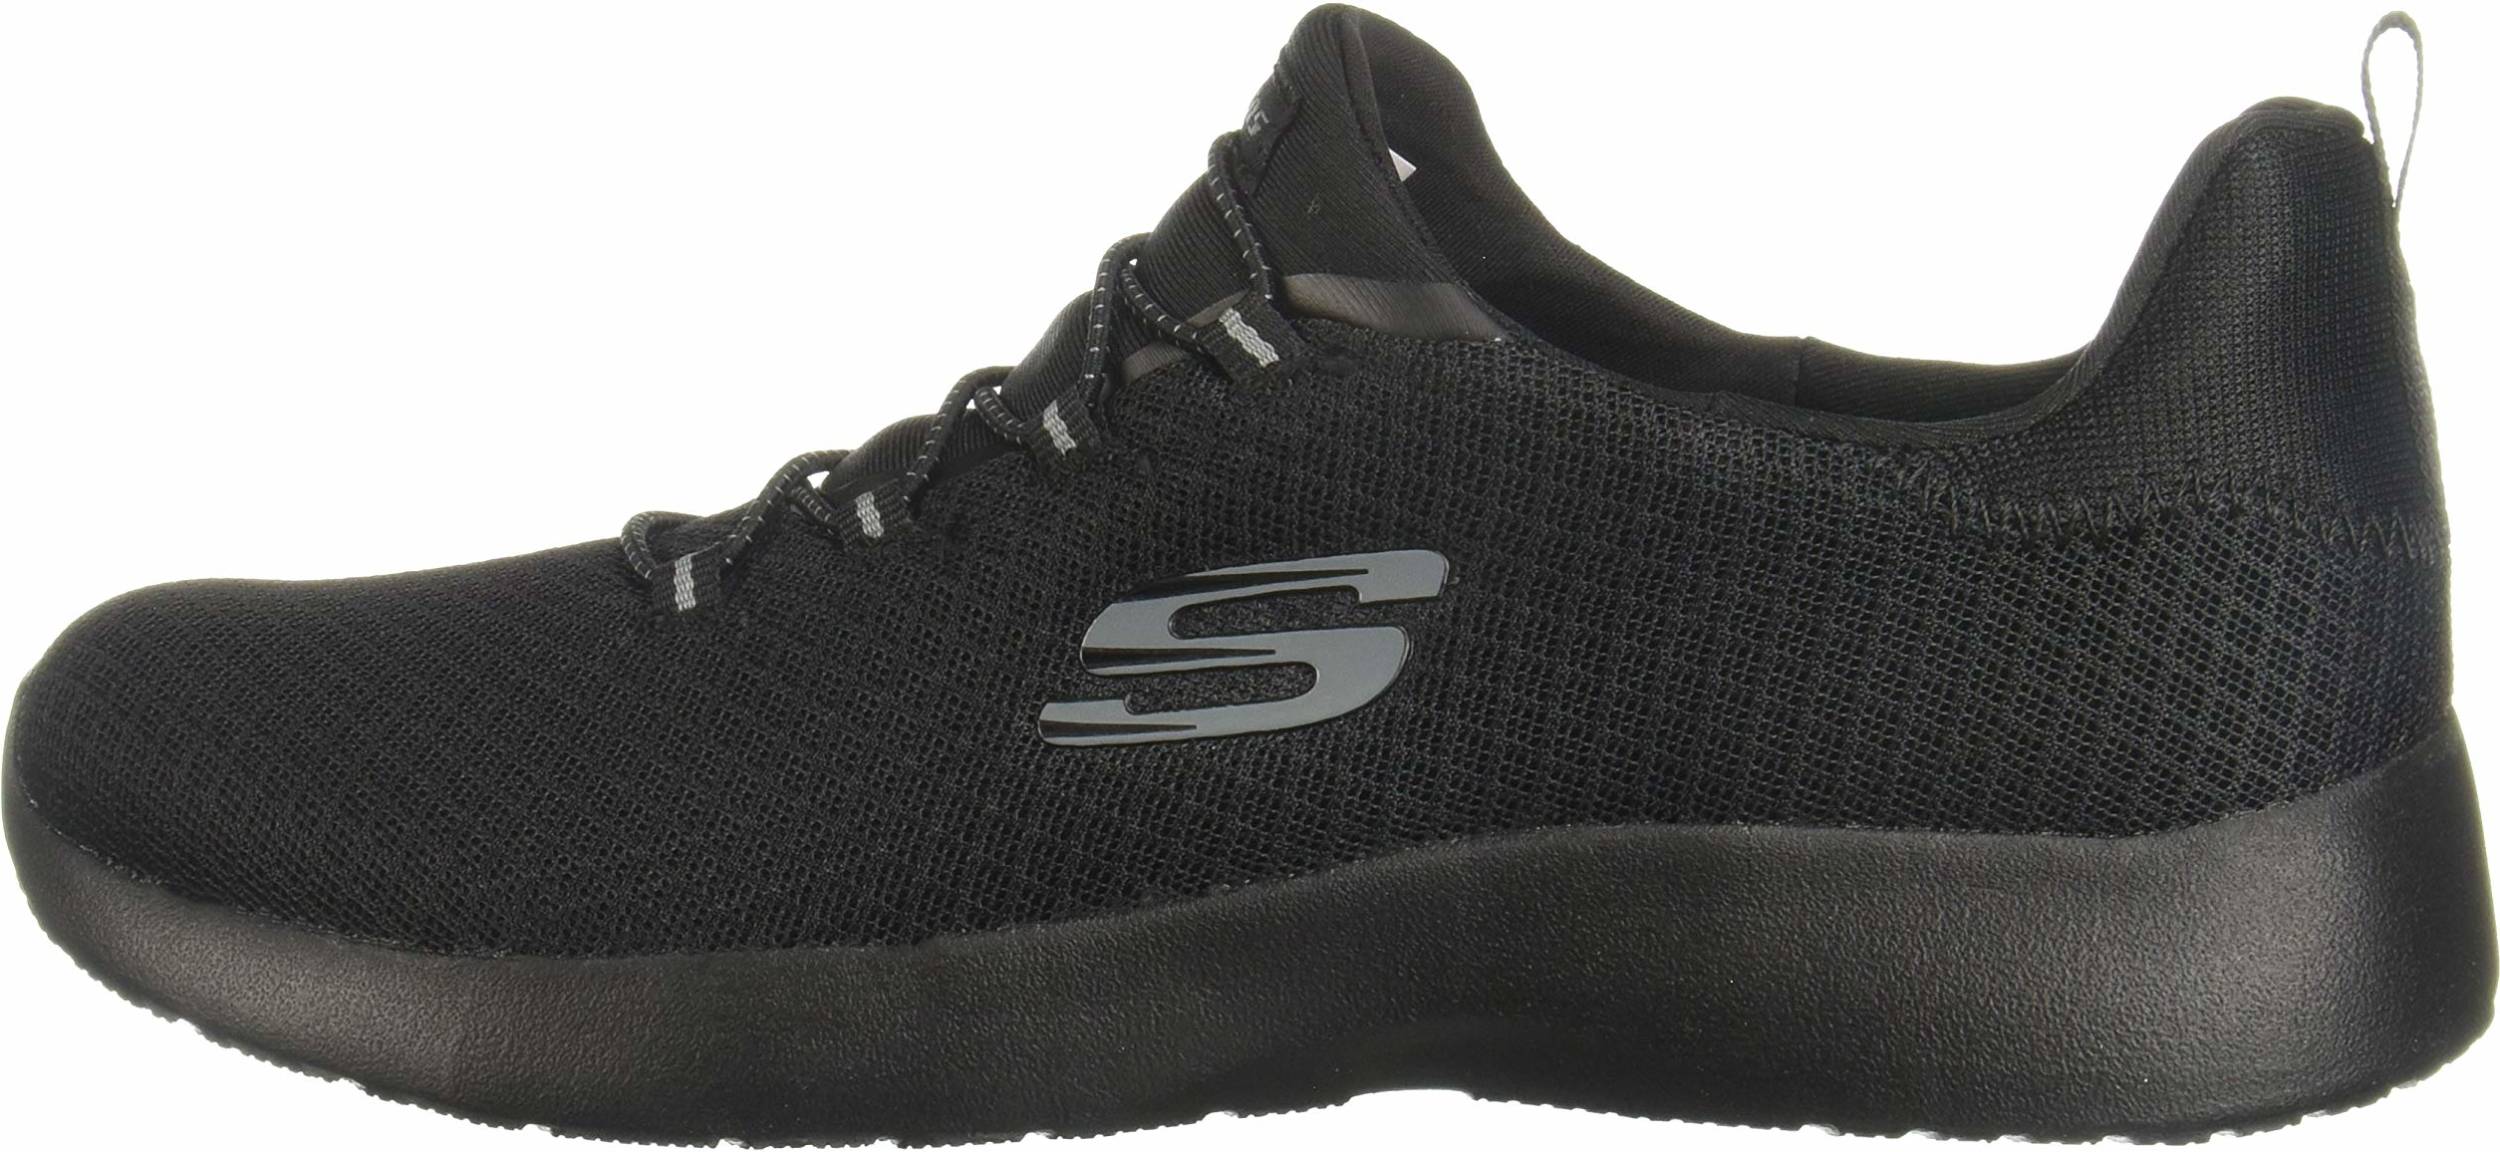 Basket Homme Skechers Mid Top Lace Up